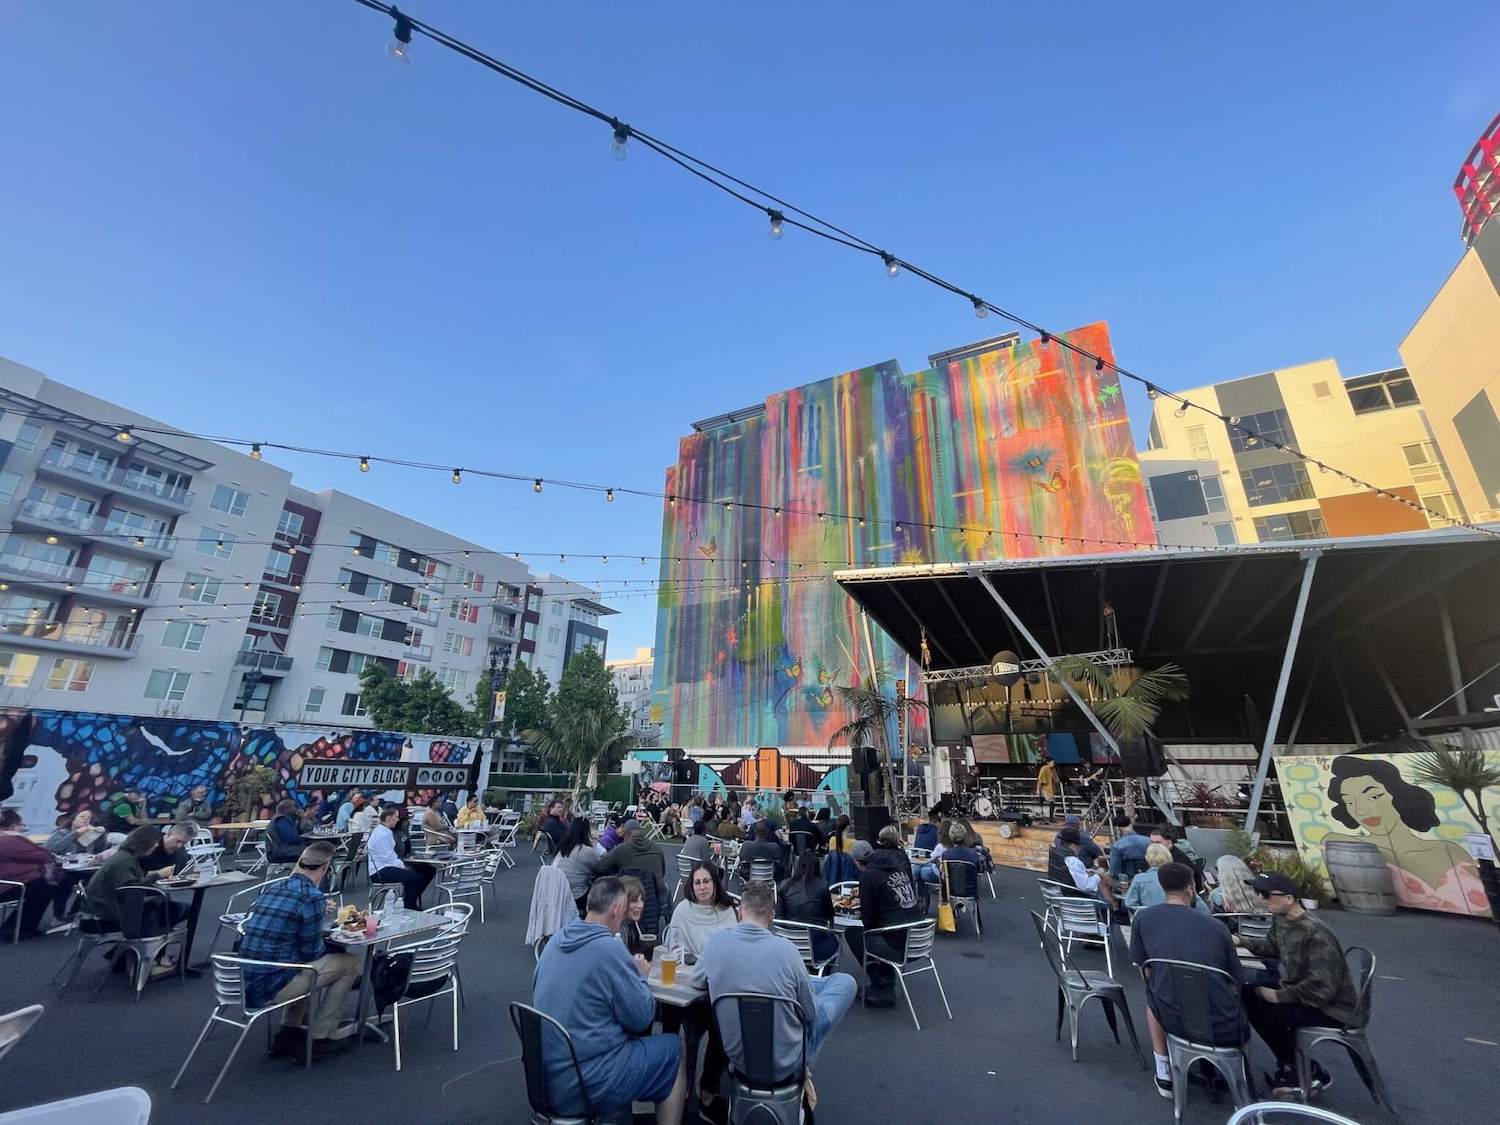 Interior of the Quartyard concert venue and event space in East Village, San Diego featuring patrons eating in front of a stage outside